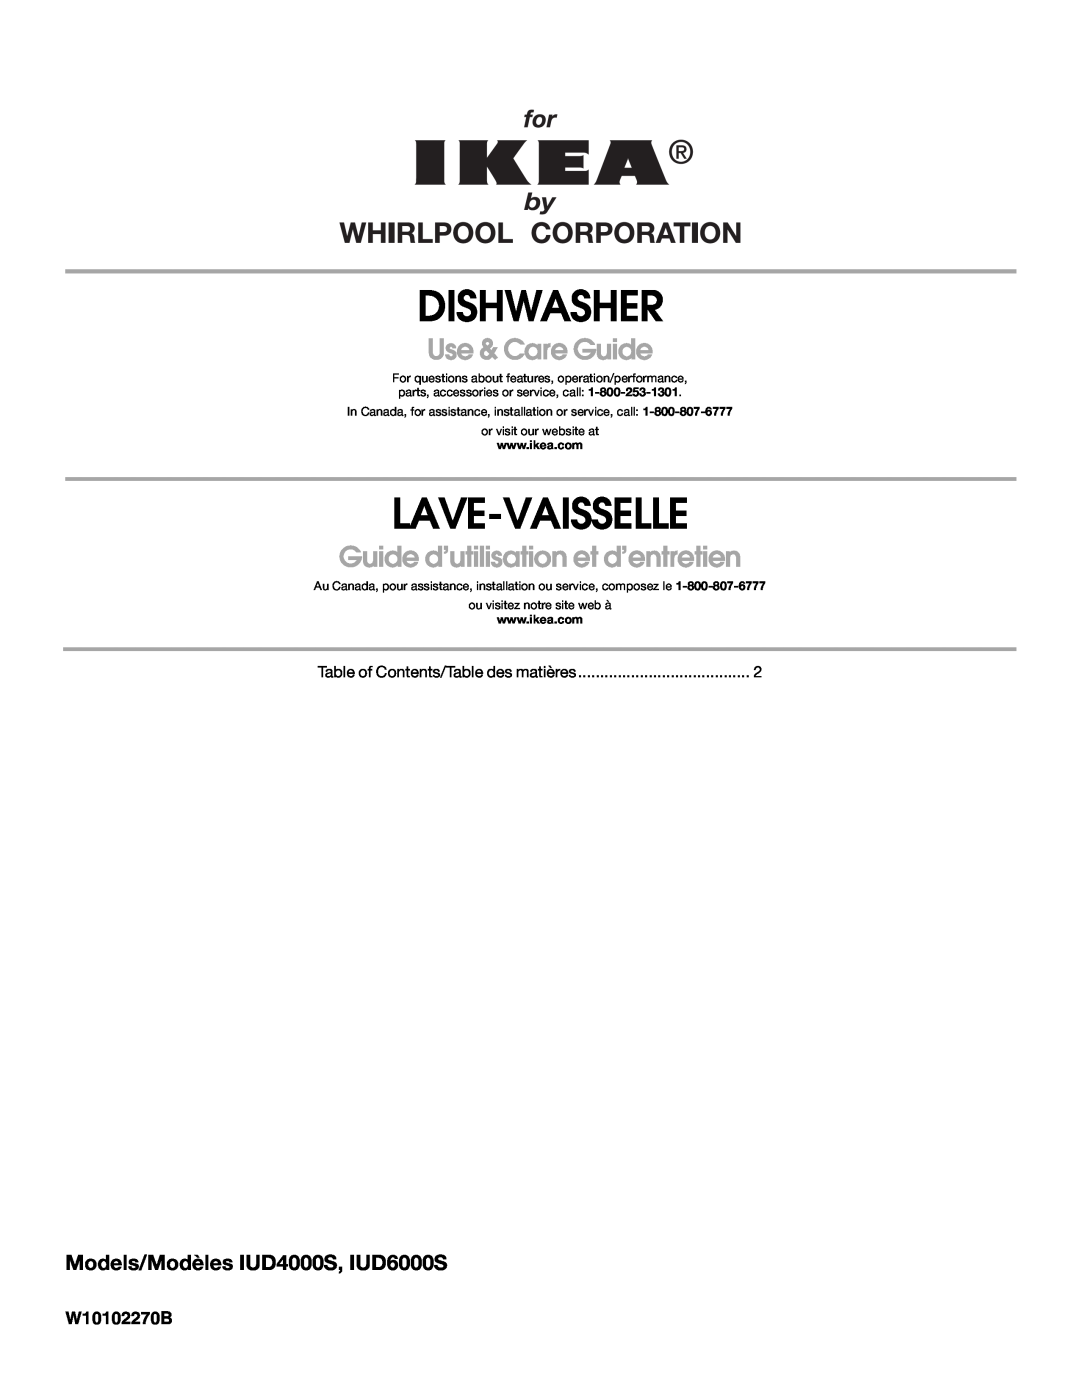 IKEA manual Models/Modèles IUD4000S, IUD6000S, Dishwasher, Lave-Vaisselle, Use & Care Guide, W10102270B 